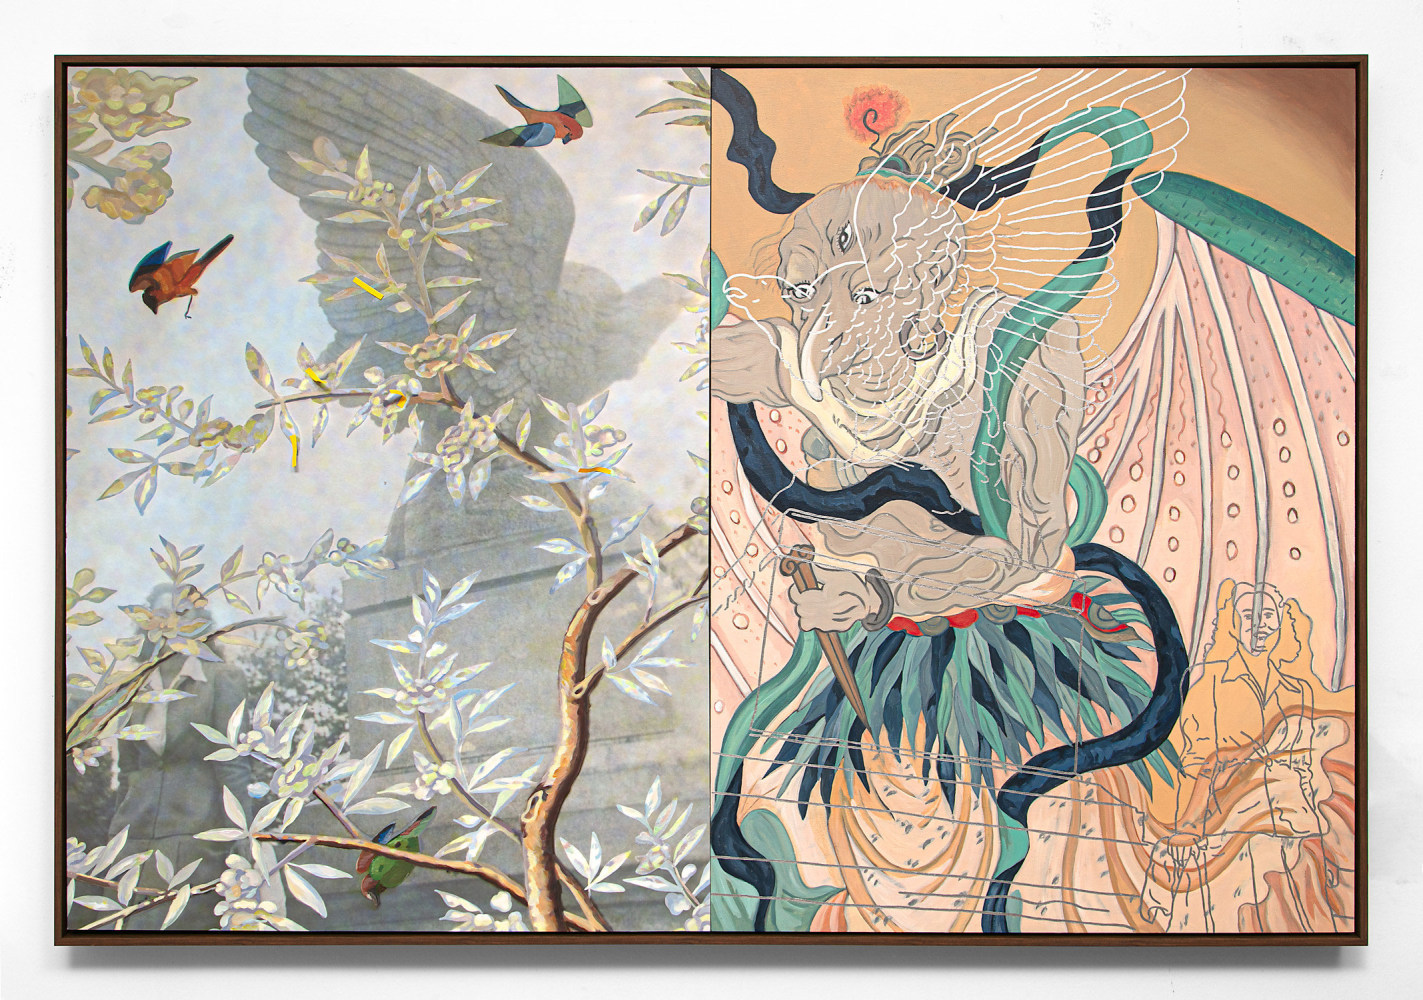 diptych with a woman standing beside a large bird monument behind painted Chinoiserie-style tree branches with birds on the left and the winged Chinese god of thunder on the right panel